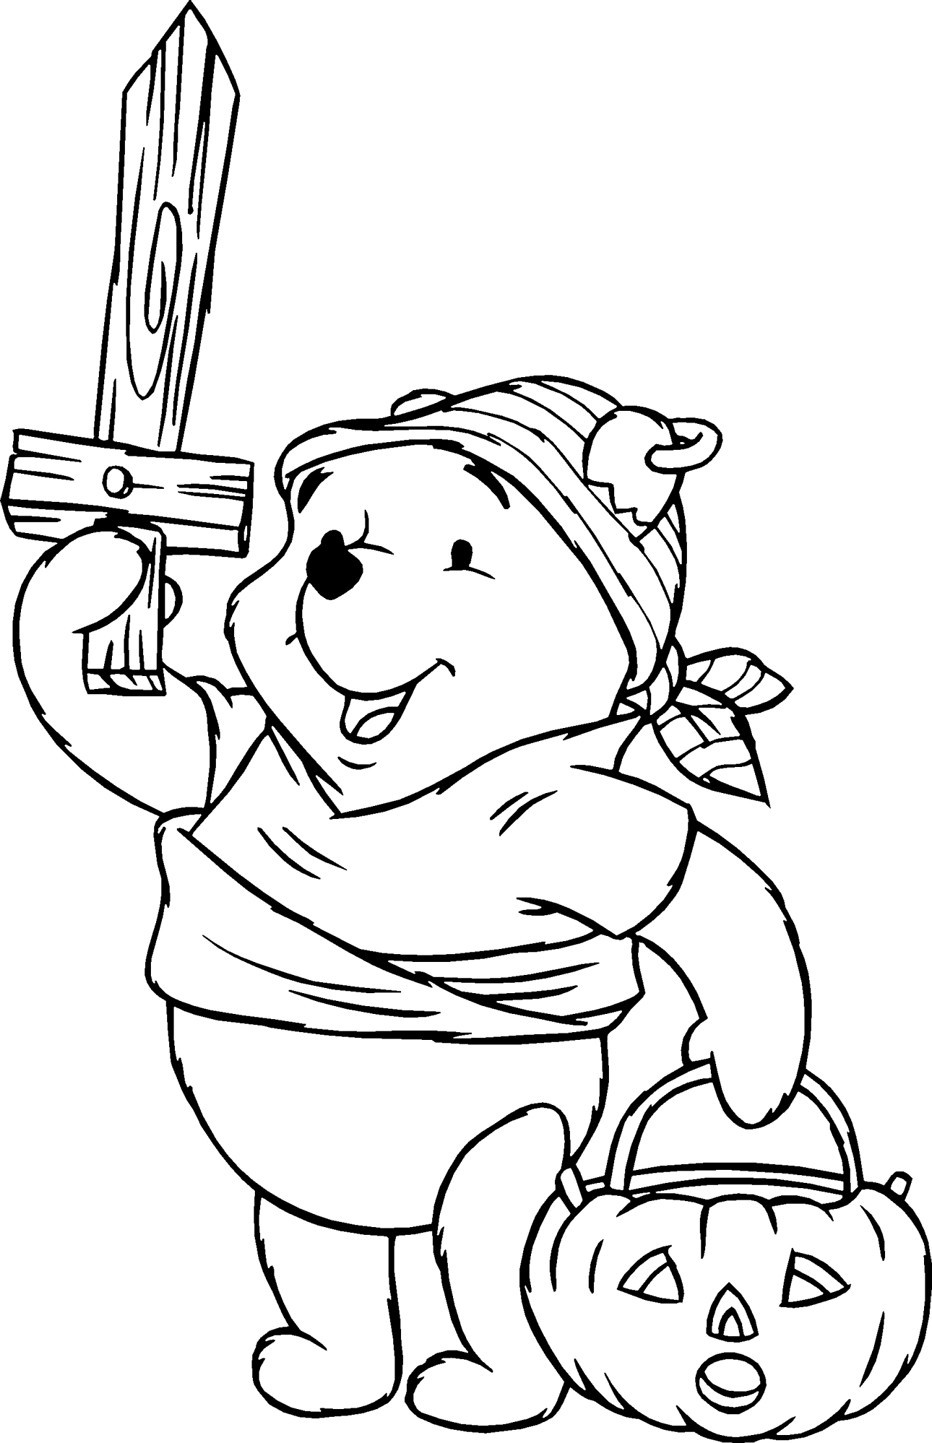 Online Coloring For Kids
 24 Free Printable Halloween Coloring Pages for Kids